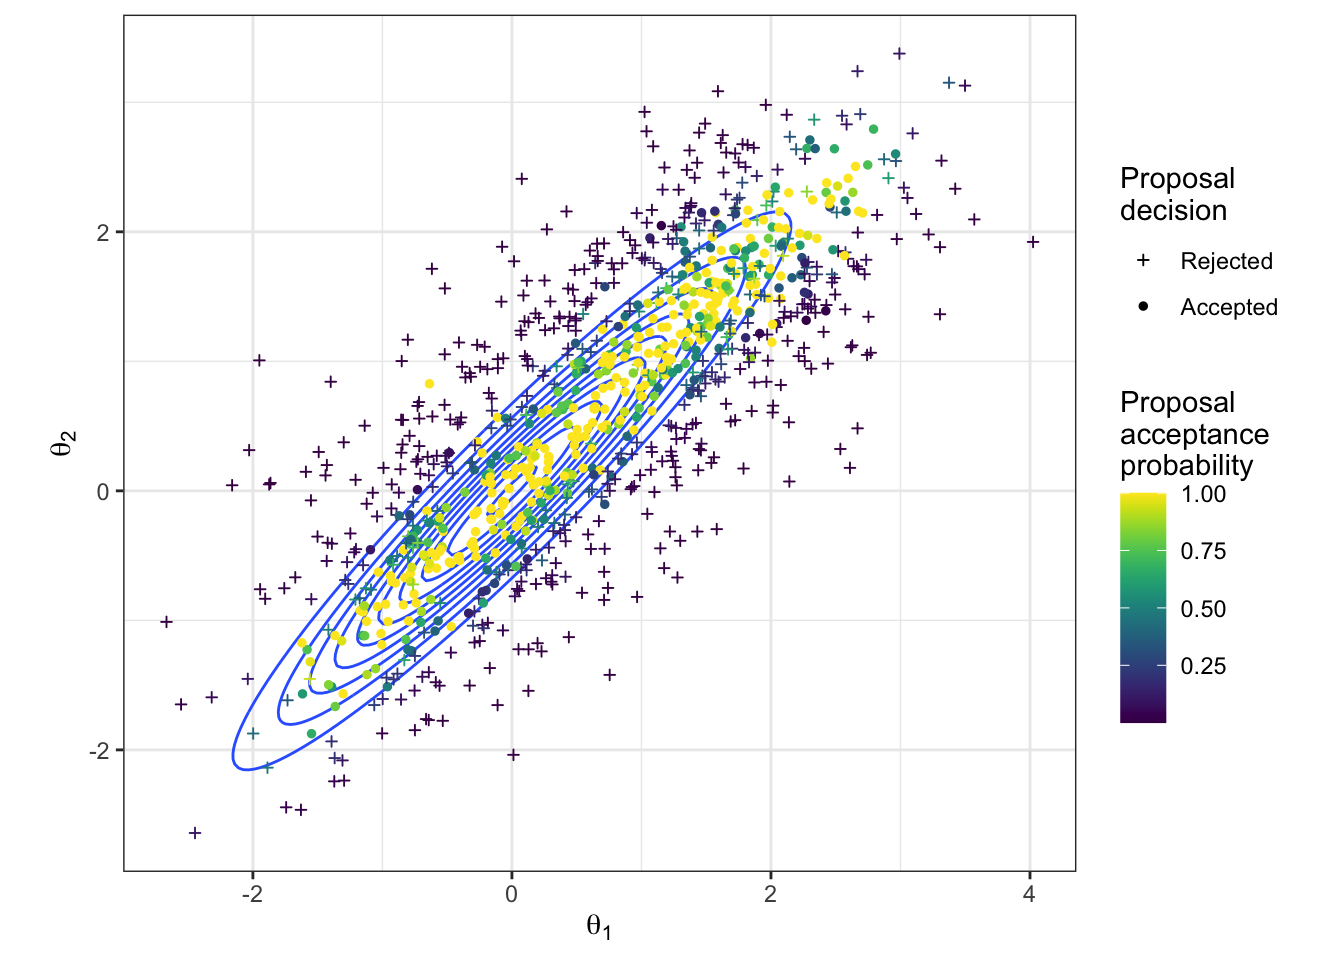 The proposed parameter values during a random-walk Metropolis-Hastings algorithm to sample from a bivariate Gaussian. The true density is shown in blue. The proposed values are coloured according to their acceptance probability when proposed, and the point character gives the resulting acceptance decision.